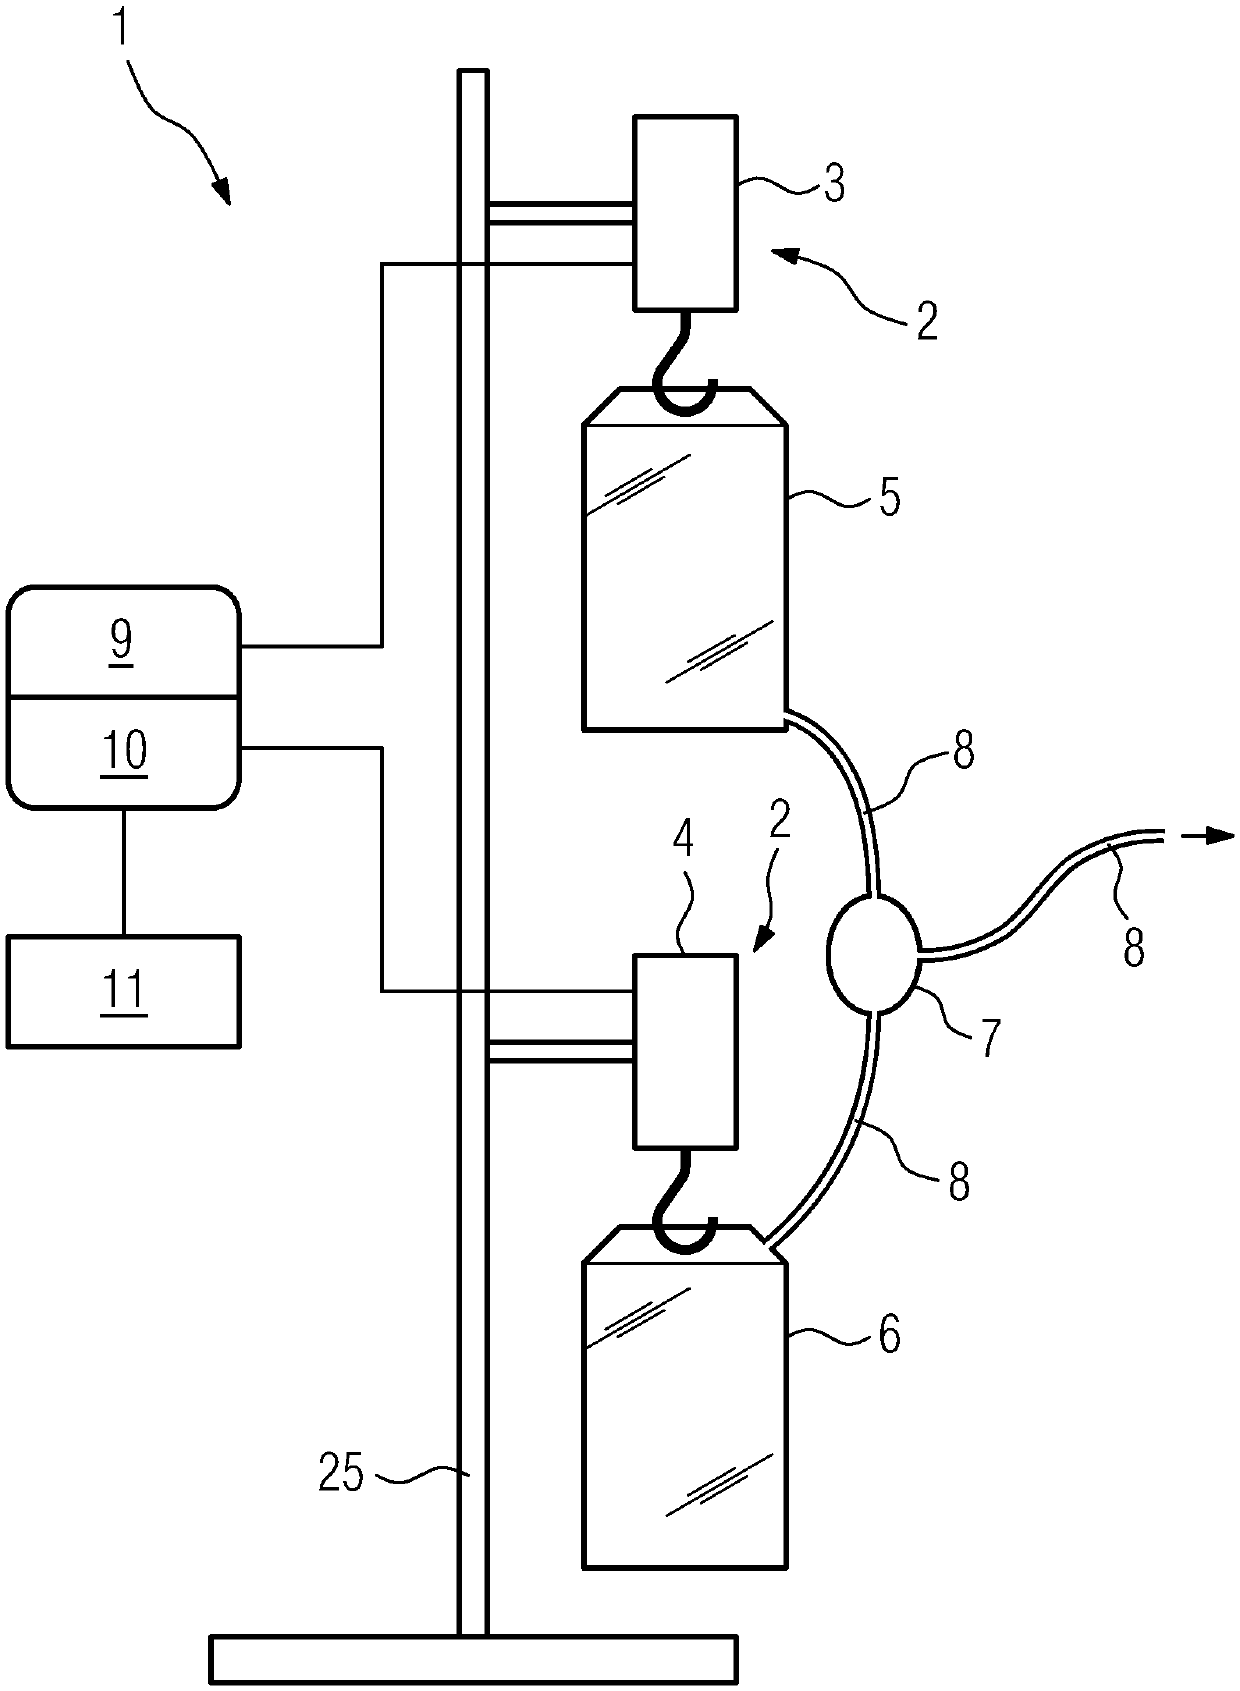 Sensor system for detecting phases and/or phase transitions in peritoneal dialysis